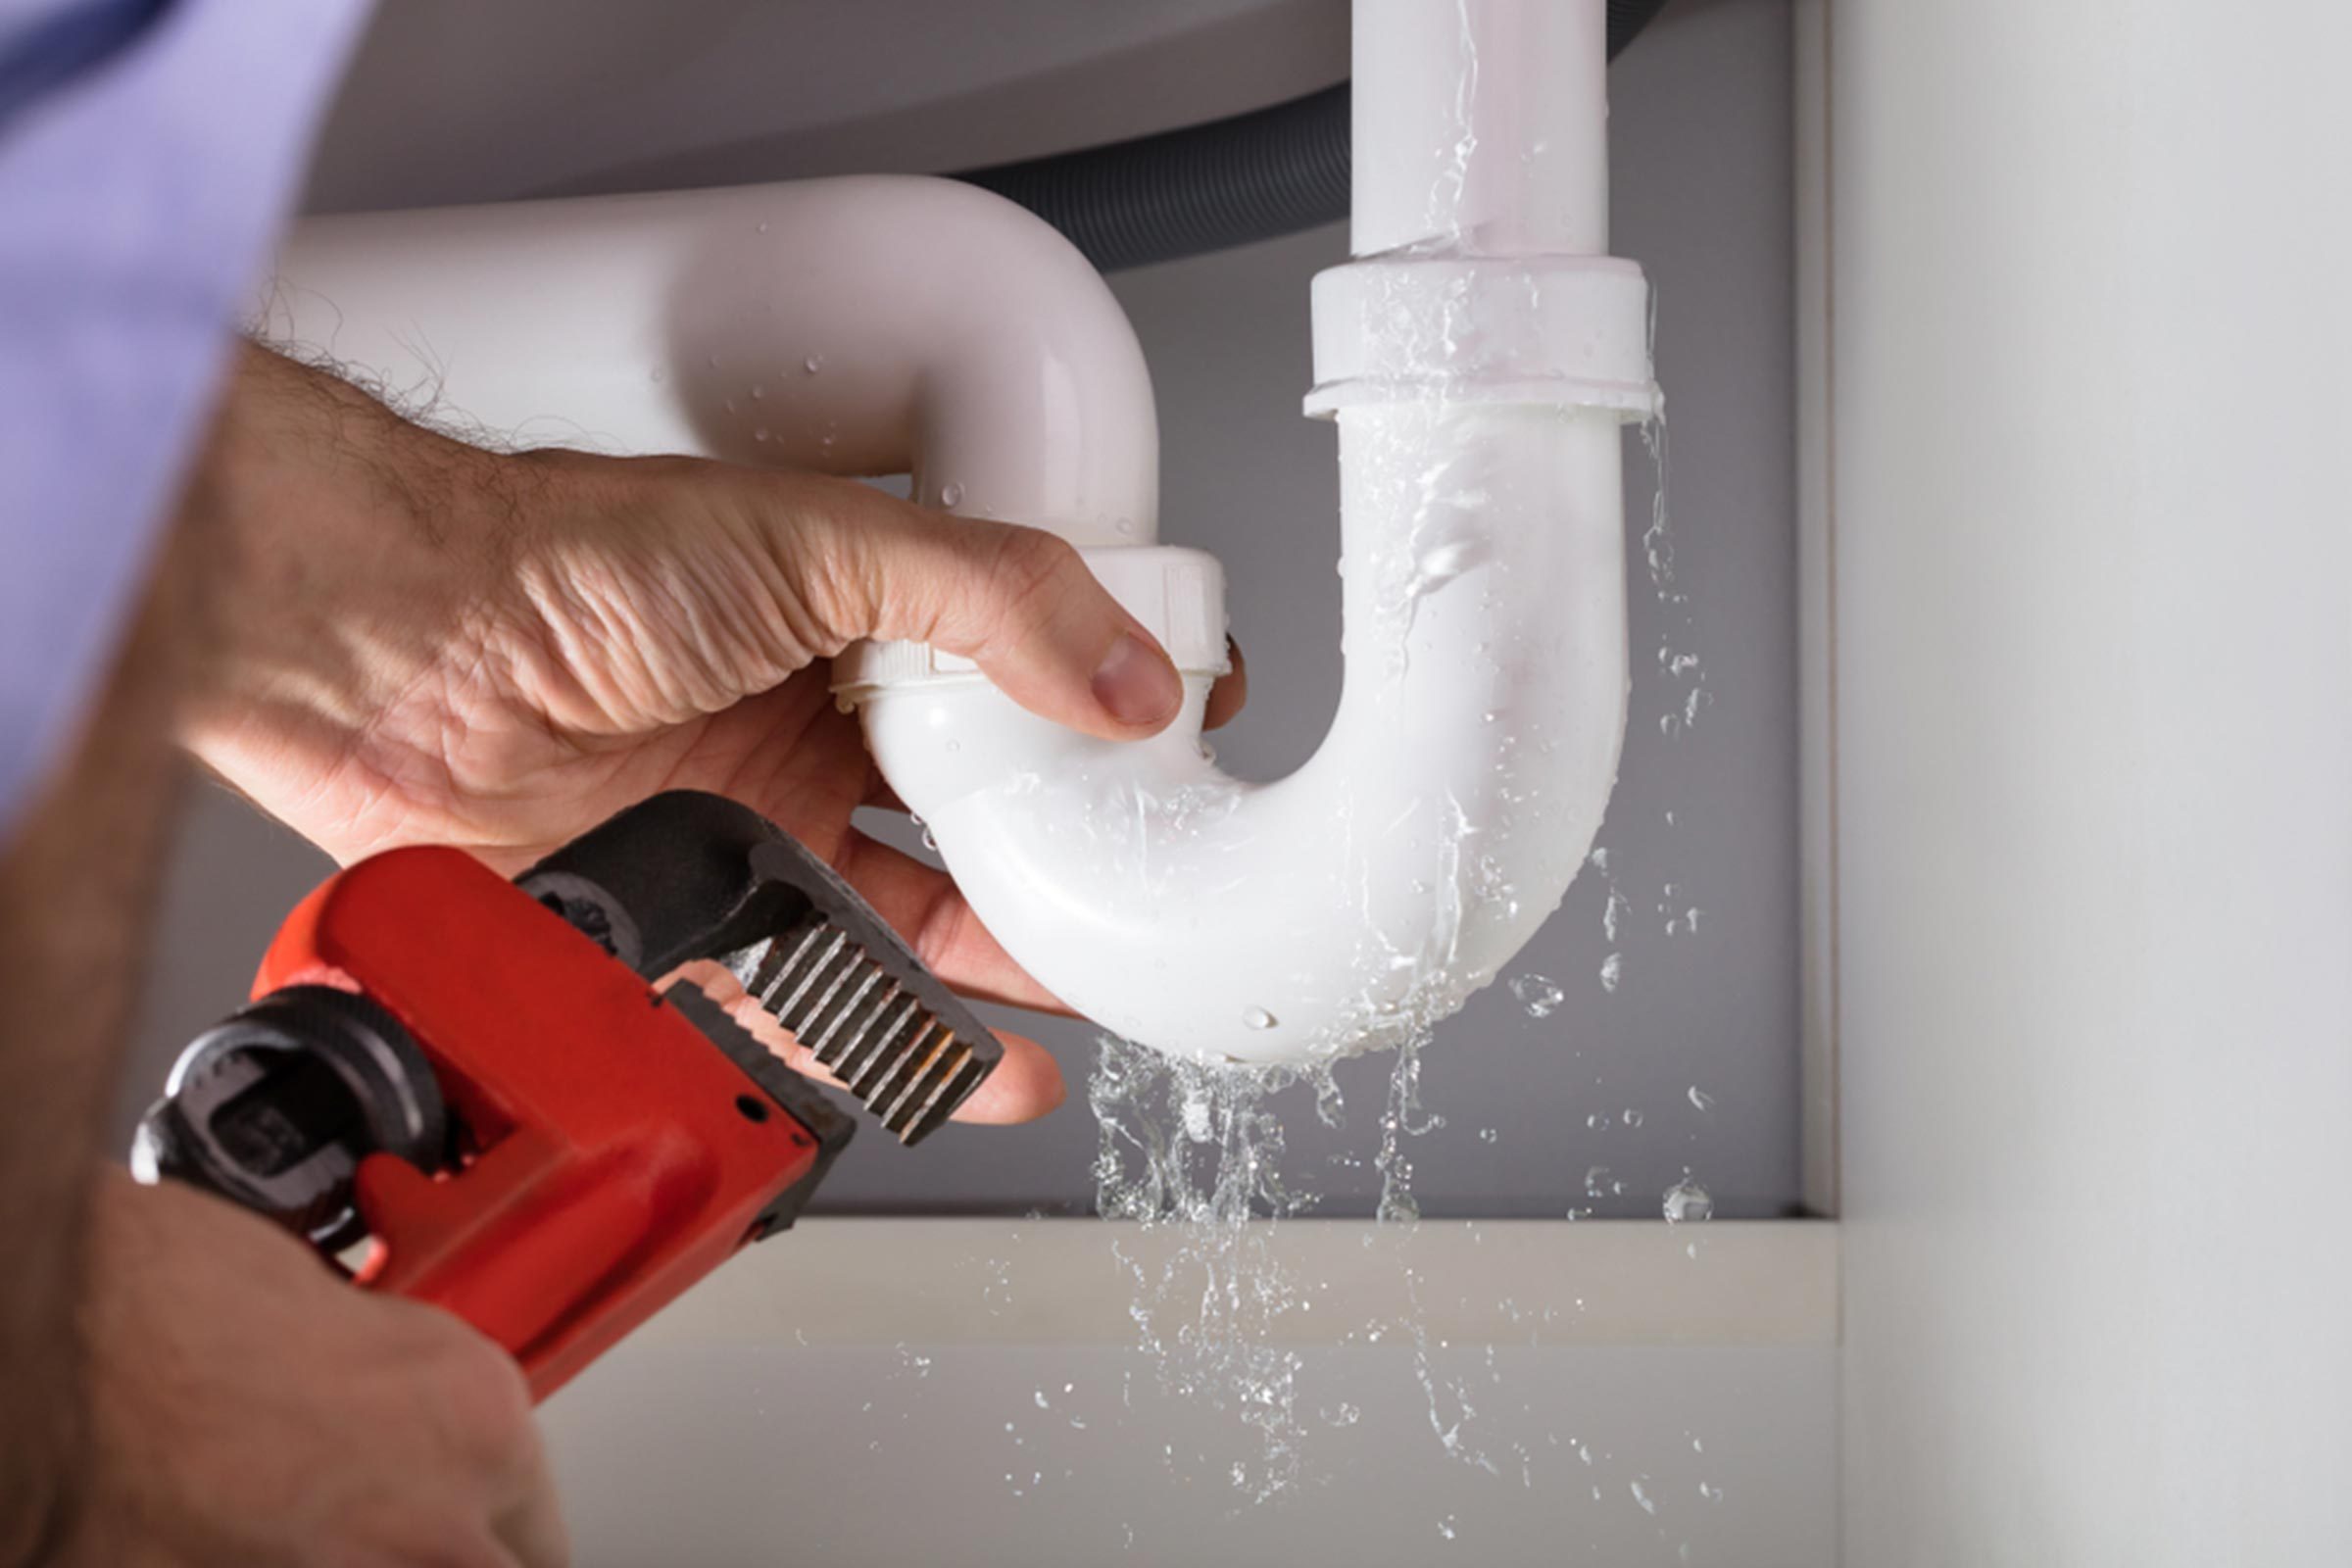 Plumbing Problems? Foolproof Tricks to Find a Quality Plumber in 2023